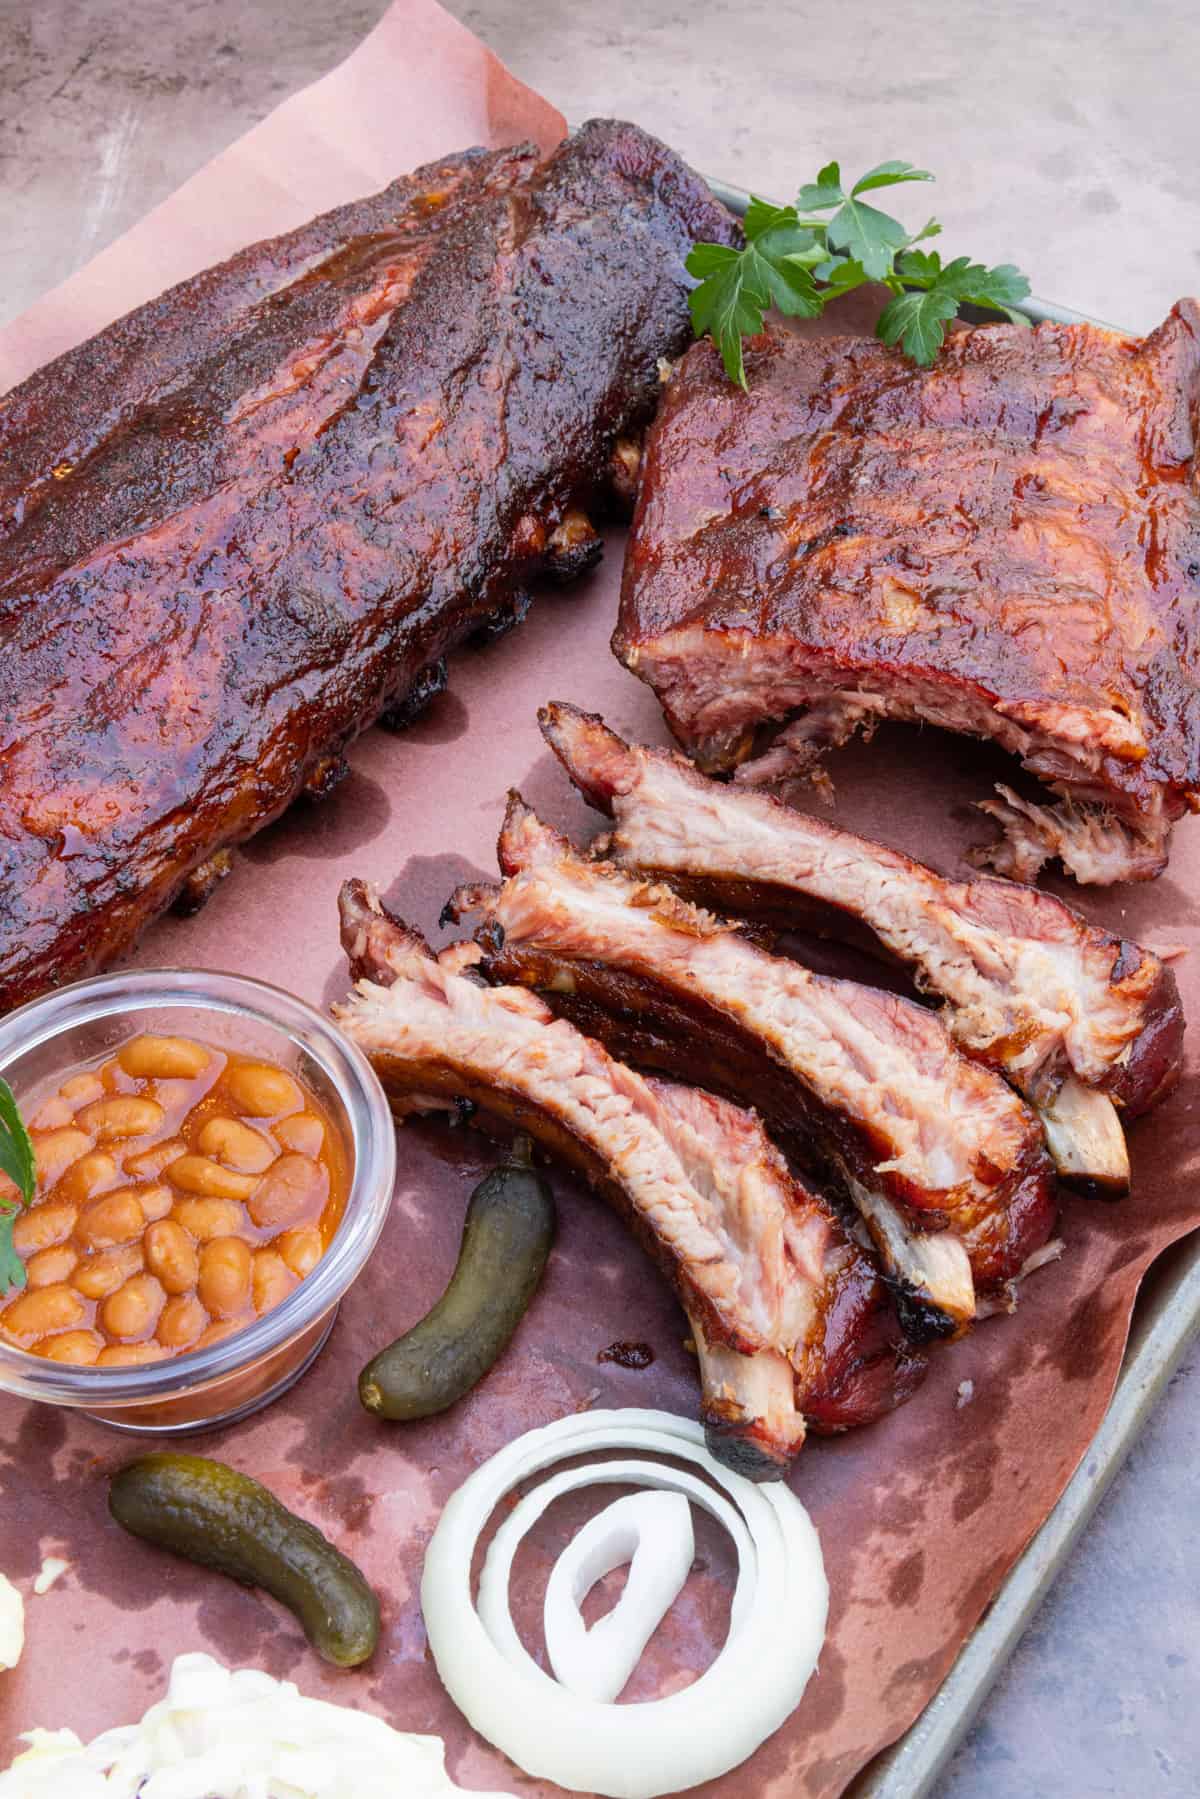 Rack of ribs on platter with onion, baked beans, pickles, and garnish.